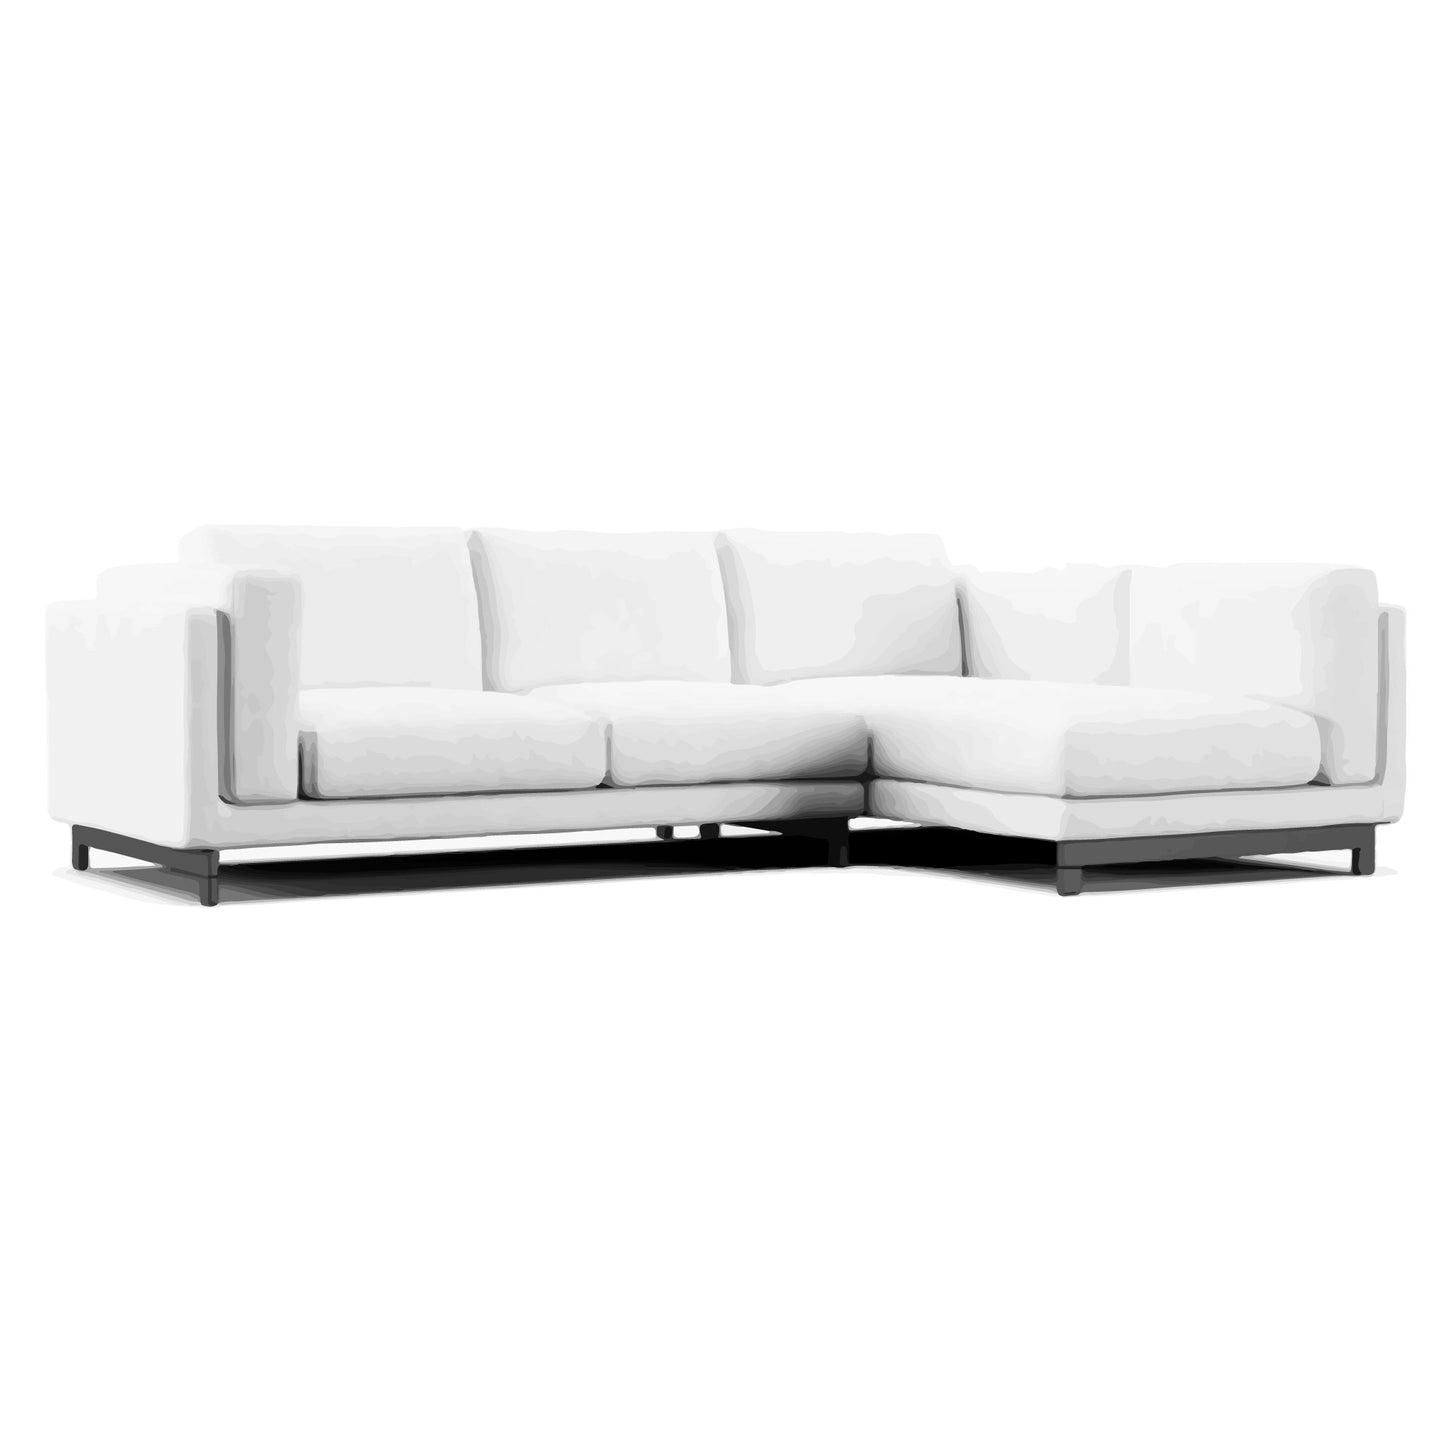 Nockeby 2 Seater Sofa Right Chaise Cover